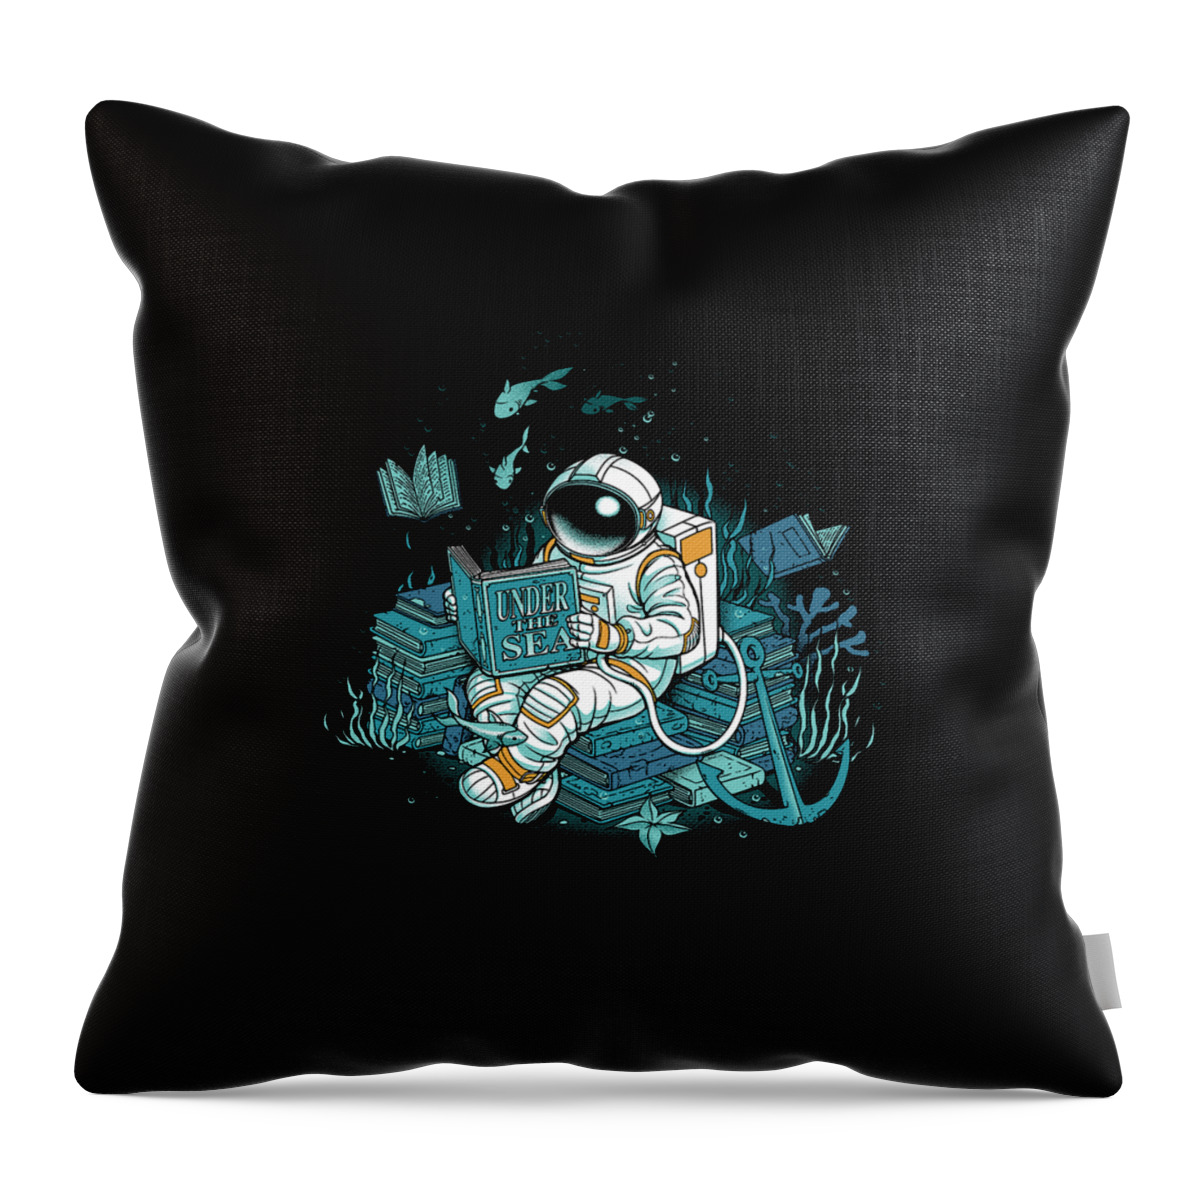  Space Throw Pillow featuring the digital art Cosmonaut Under The Sea by Holly Wilkinson